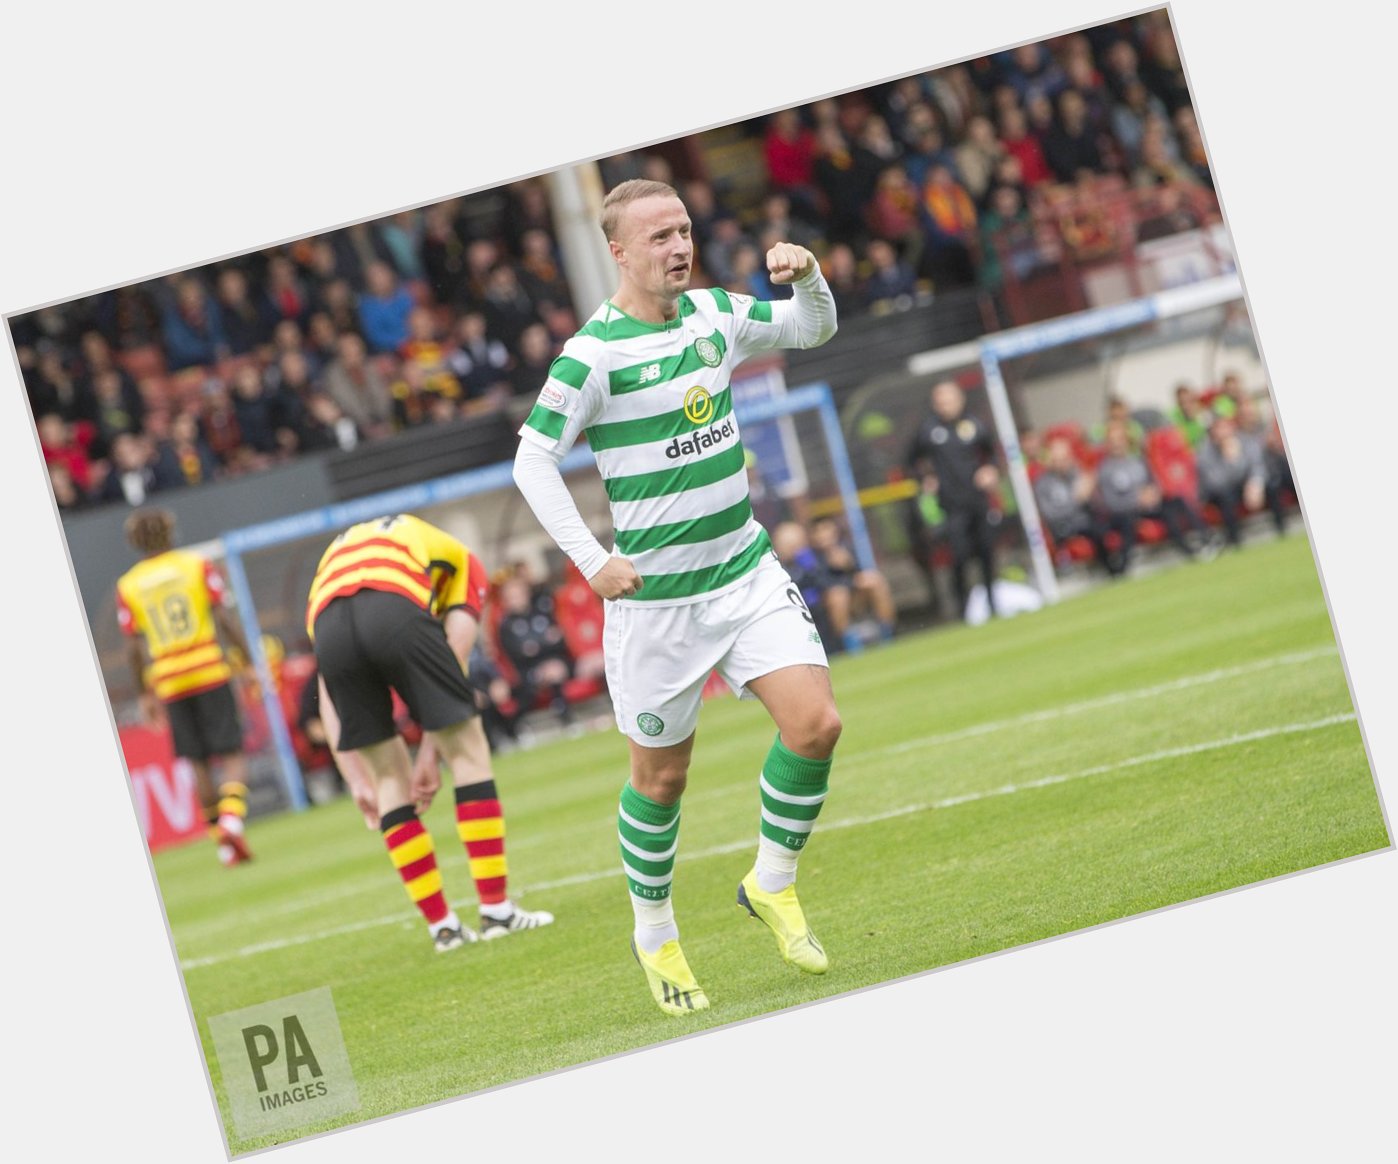 Happy birthday to Celtic and Scotland striker Leigh Griffiths, who is celebrating his 28th birthday today. 